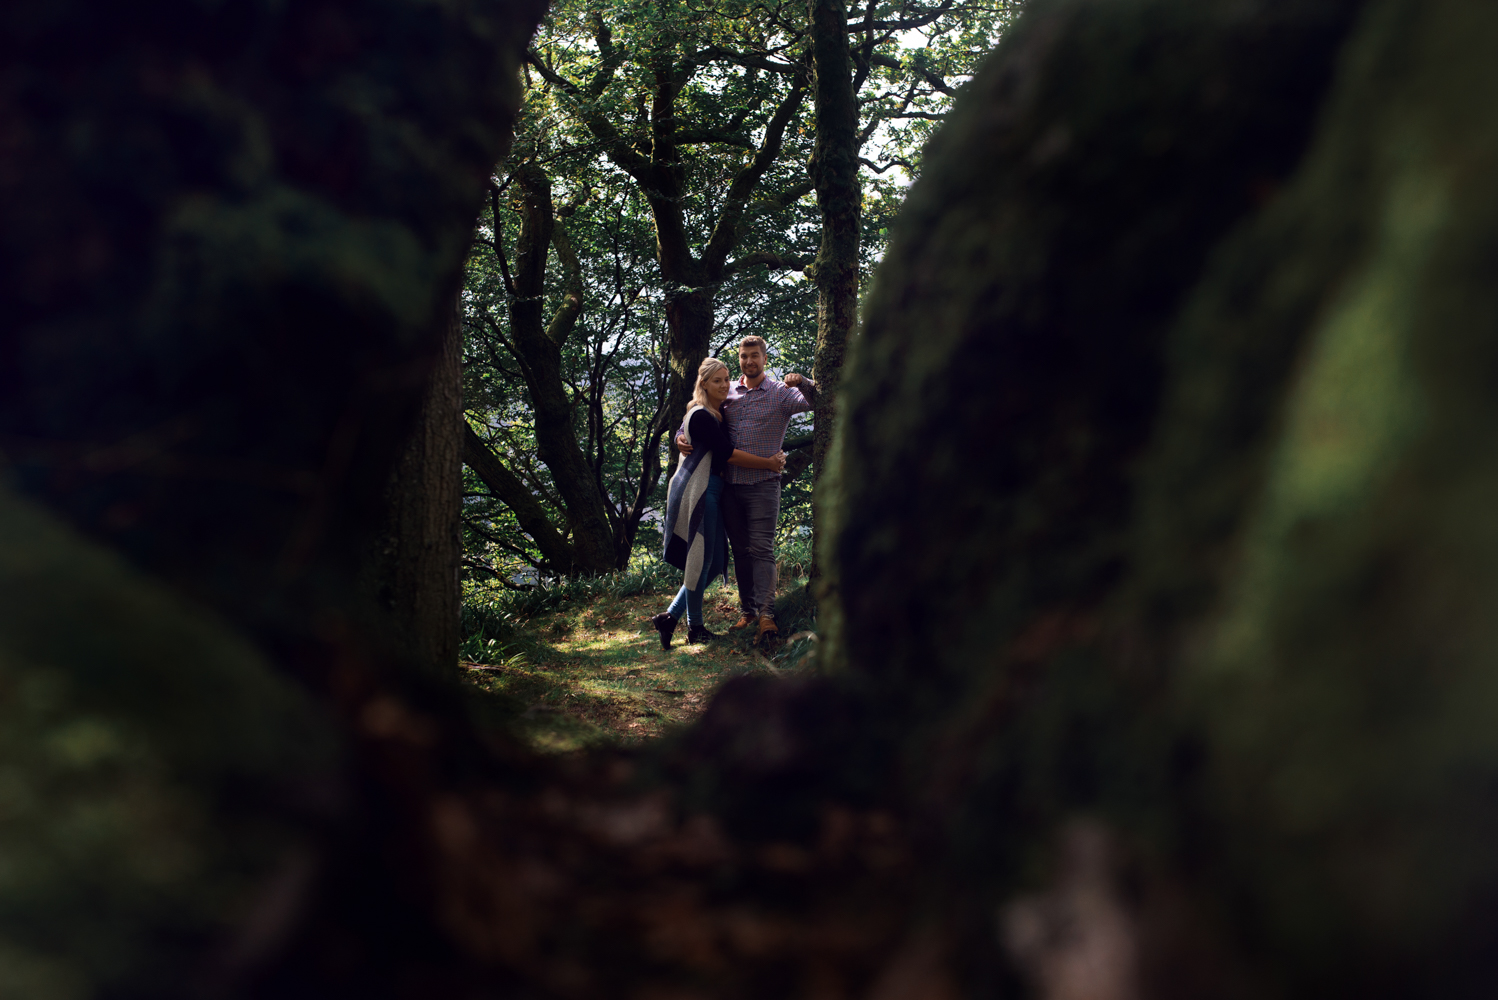 Pre shoot - A couple standing in the woods near Derwent water in the Lake District